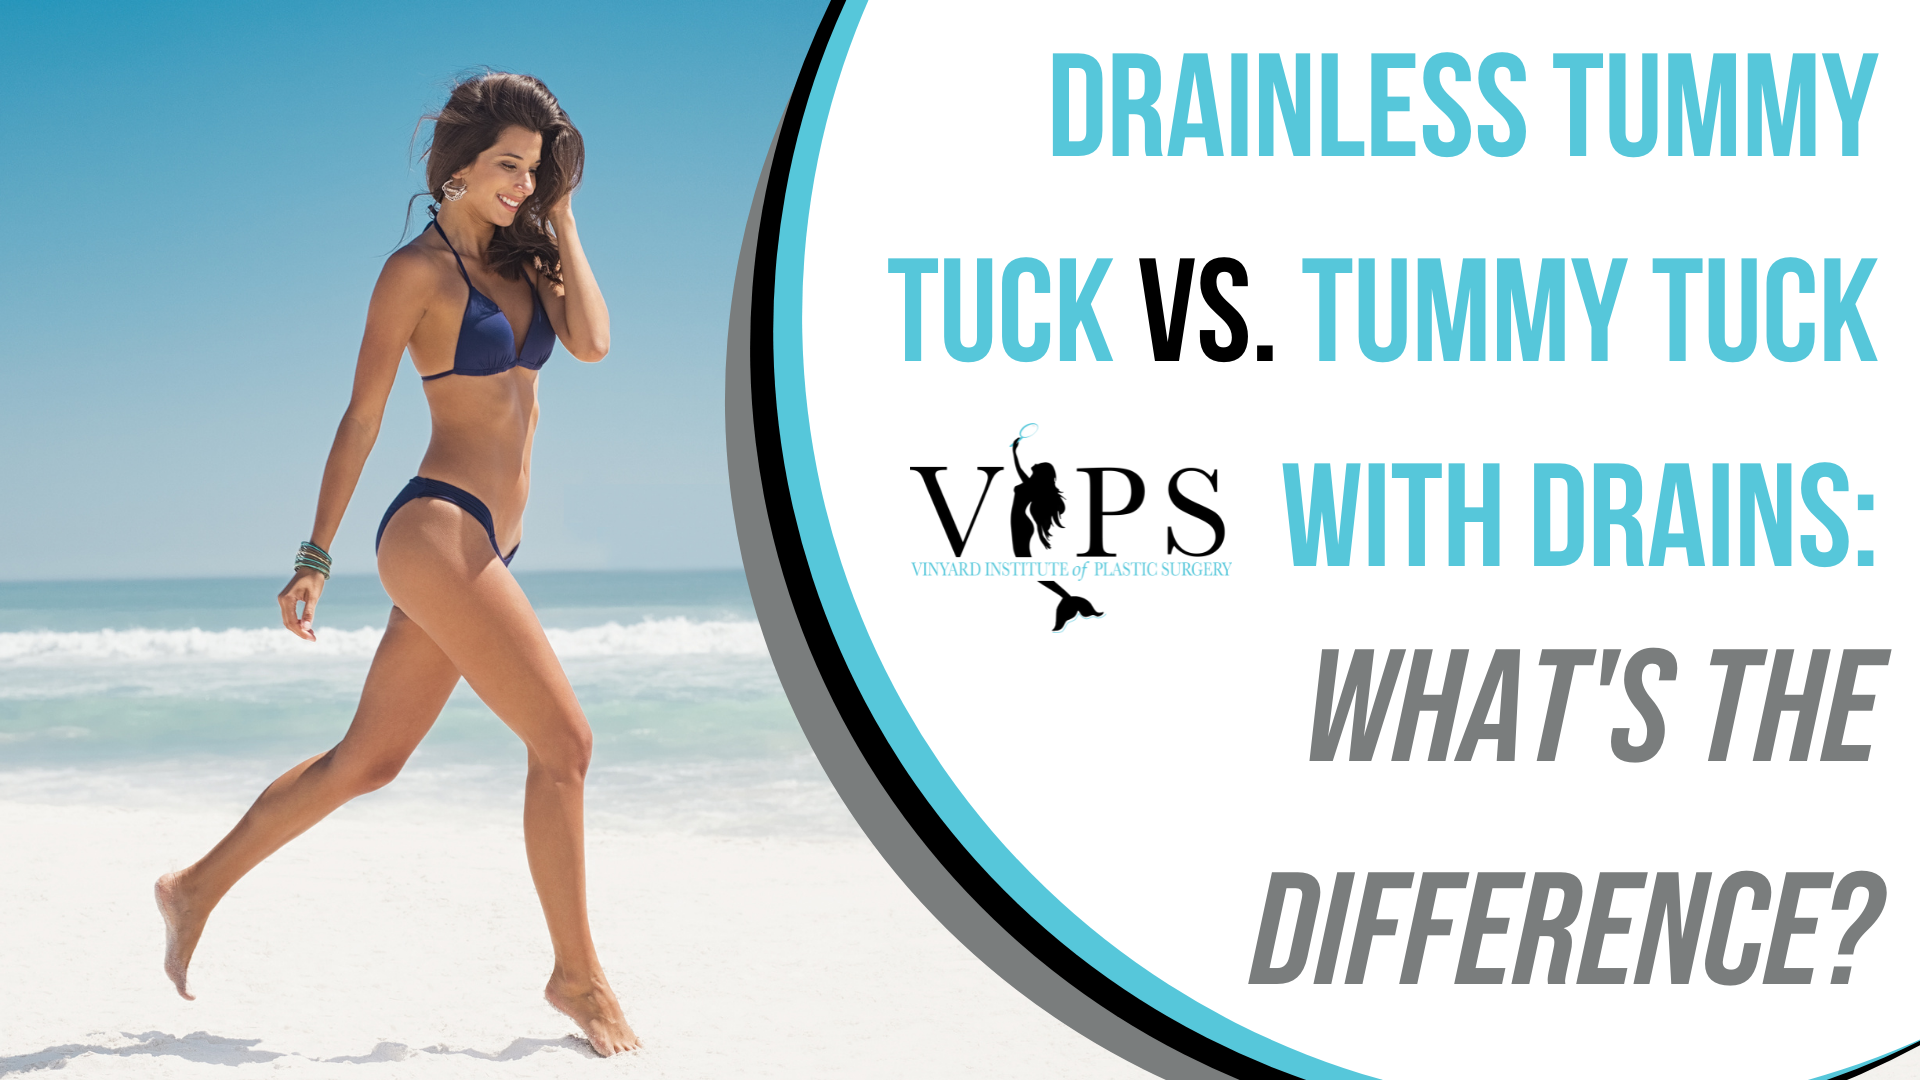 Drainless Tummy Tuck vs. Tummy Tuck With Drains: What's The